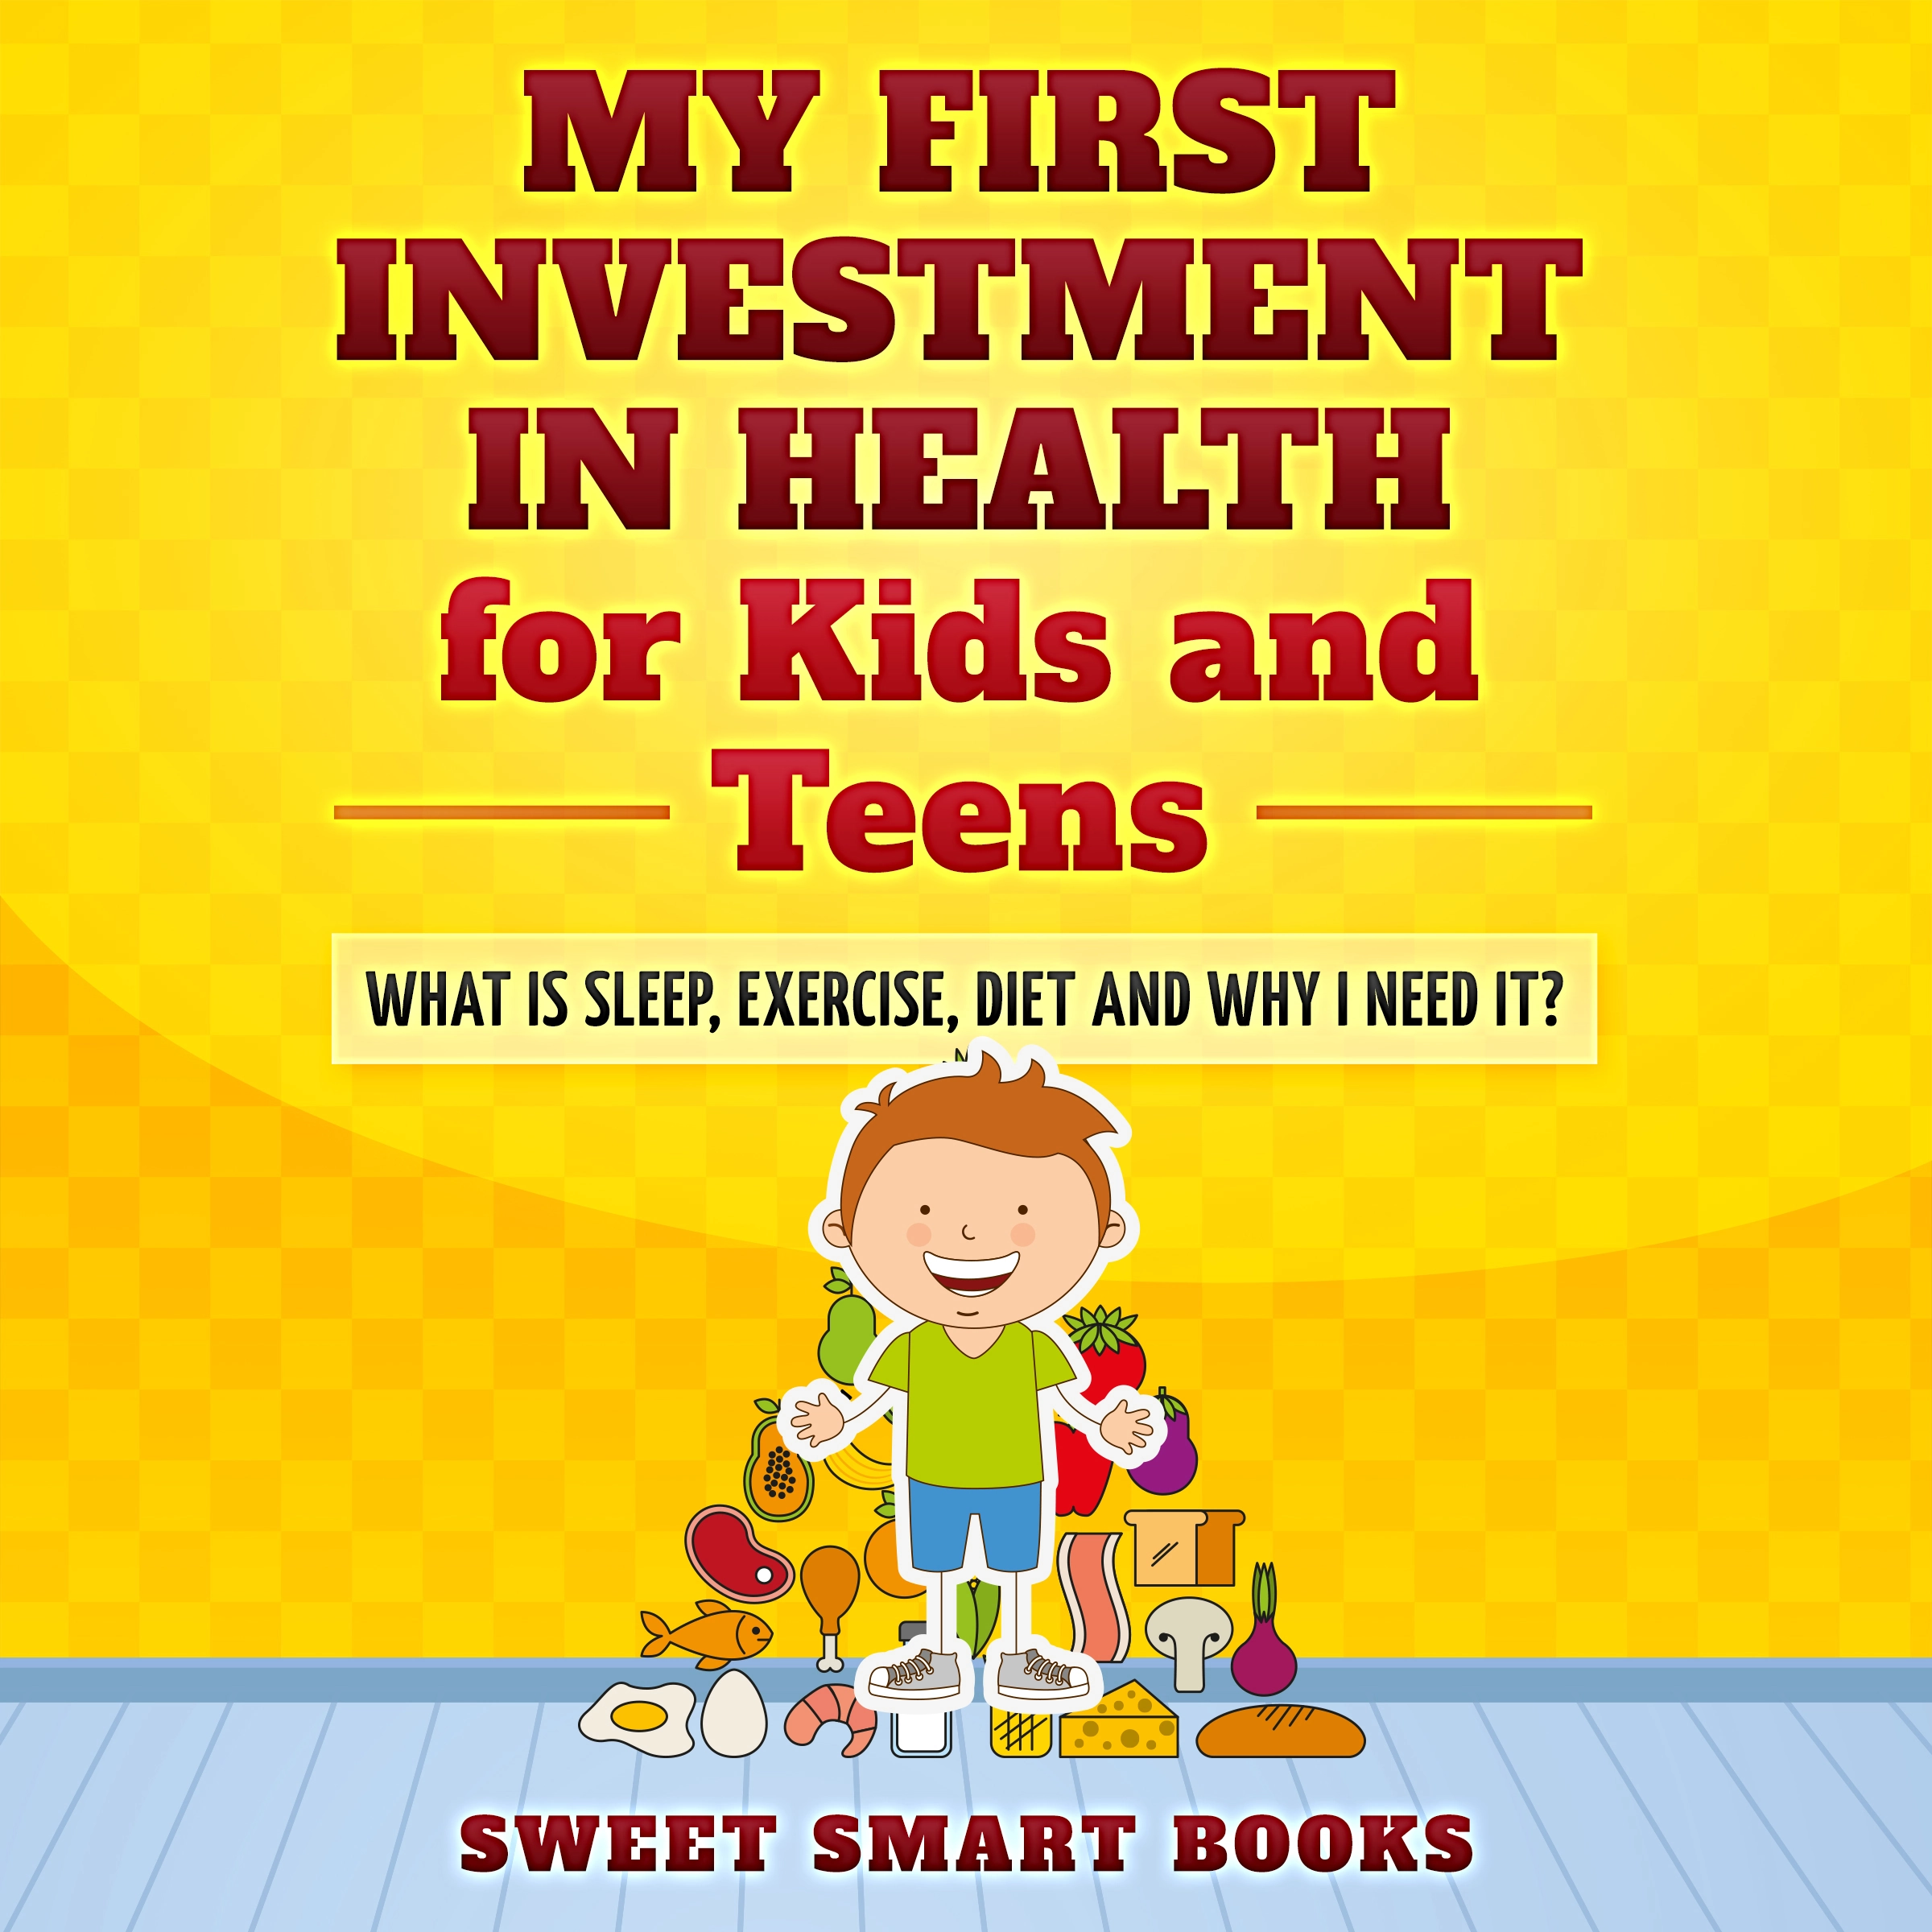 My First Investment in Health for Kids and Teens Audiobook by Sweet Smart Books